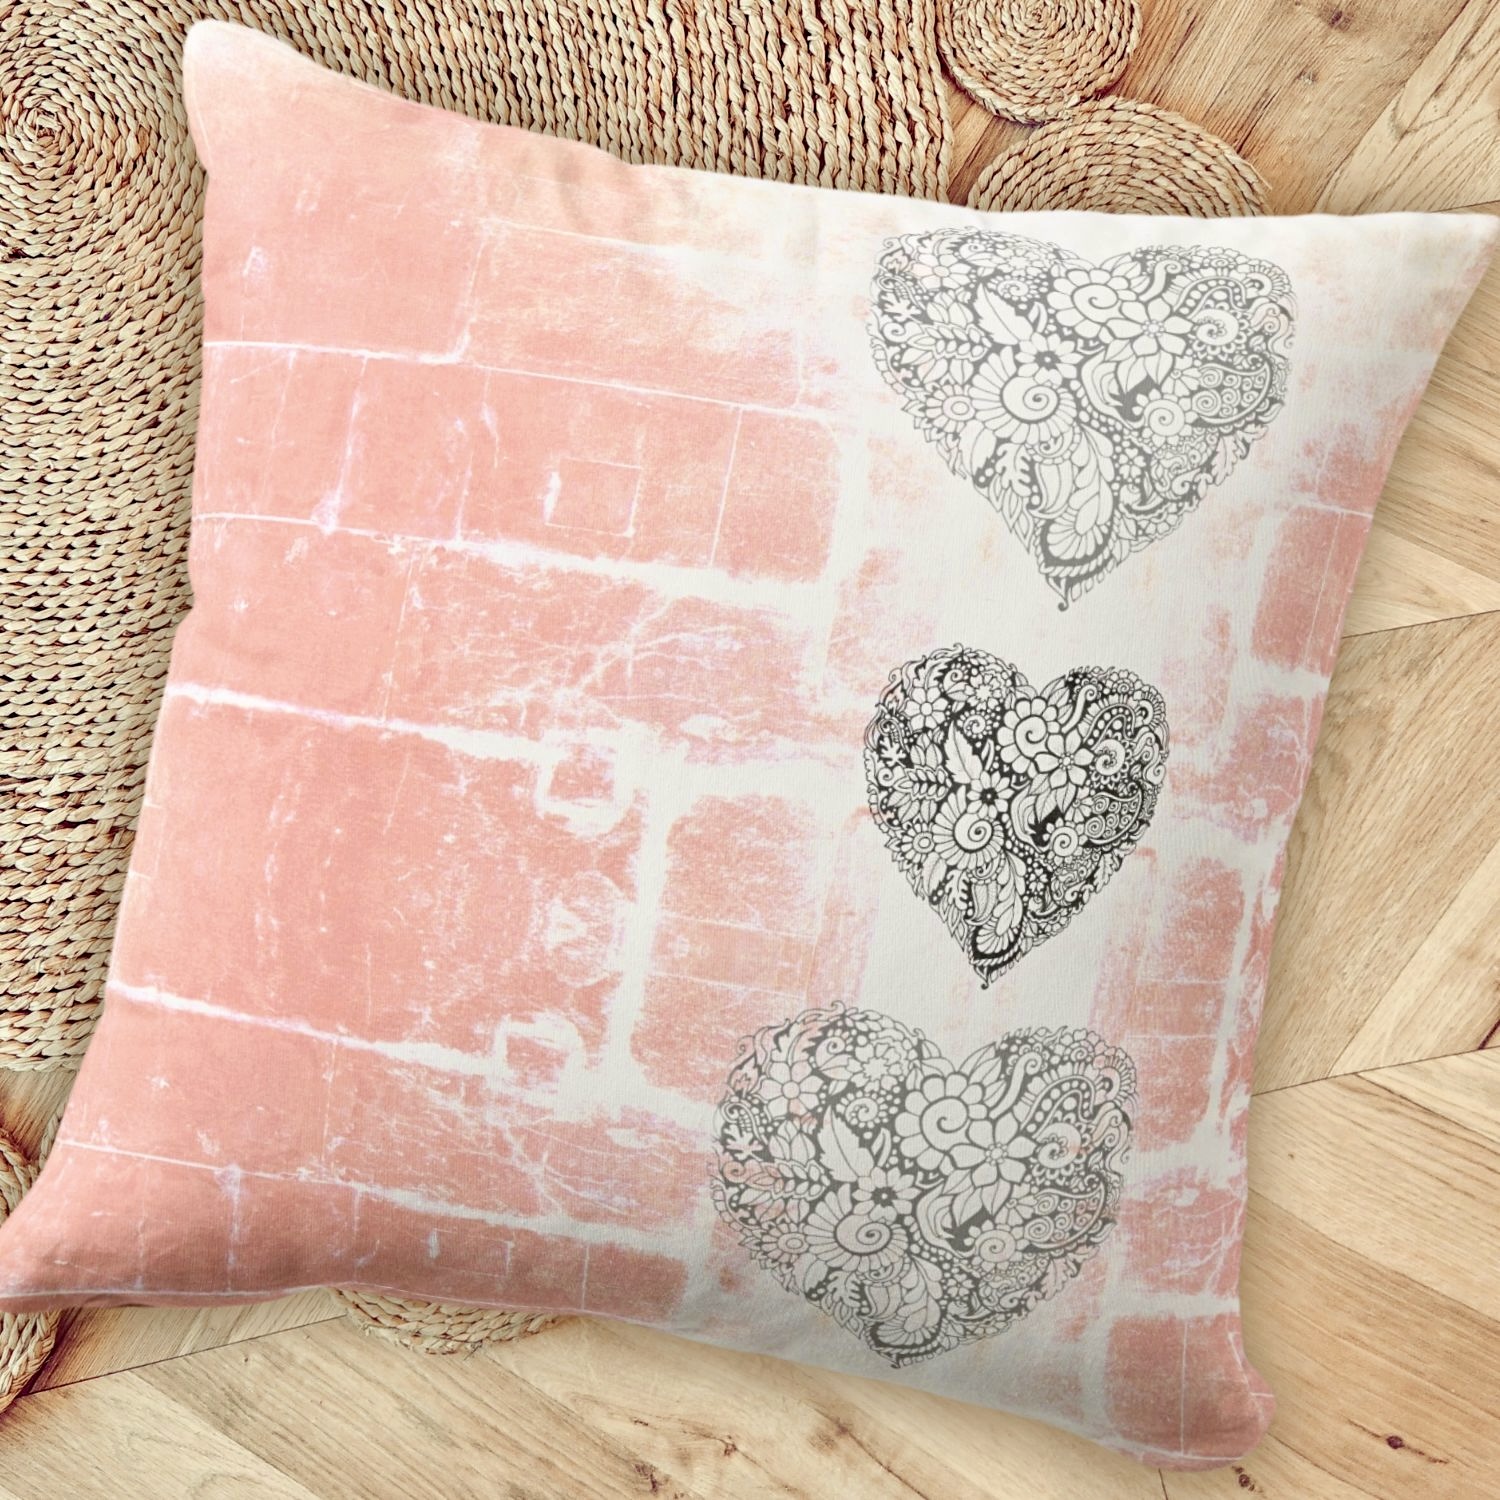 Back side of rustic peach pillow with three heart design arranged vertically, adding charm and character to the decor.